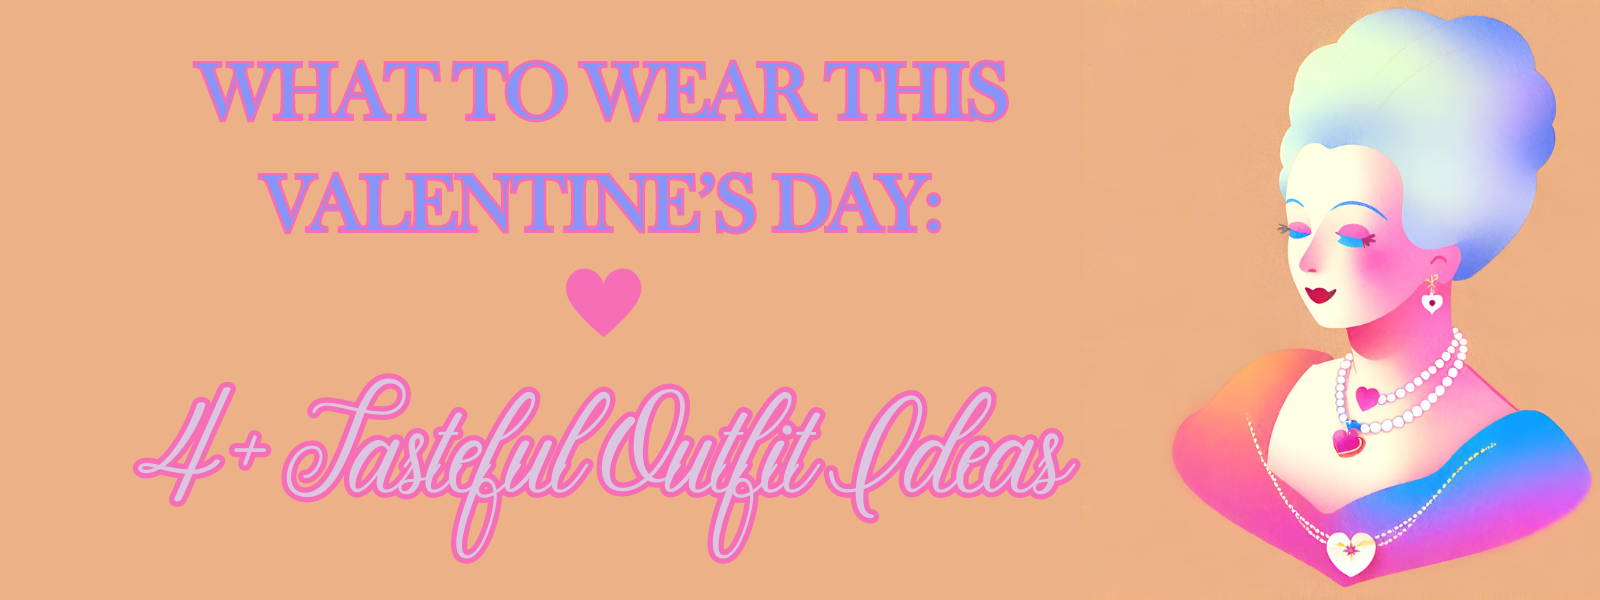 What to Wear This Valentine’s Day: 4+ Tasteful Outfit Ideas 